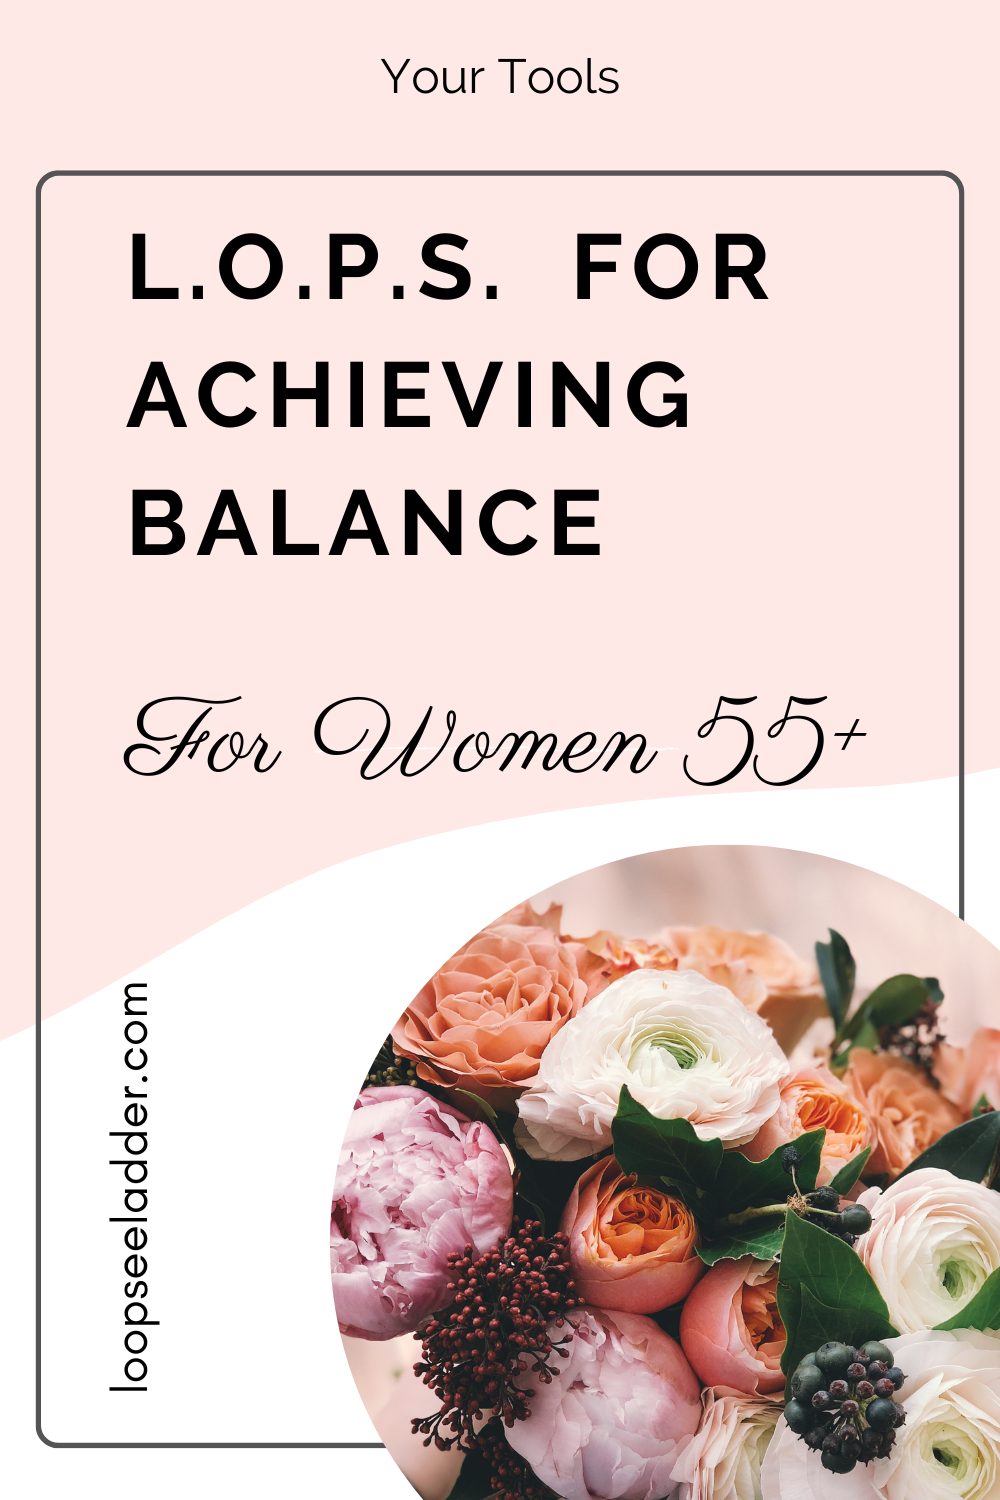 L.O.P.S. - A Framework for Women 55+ to Use to Achieve Balance in Their LIfe